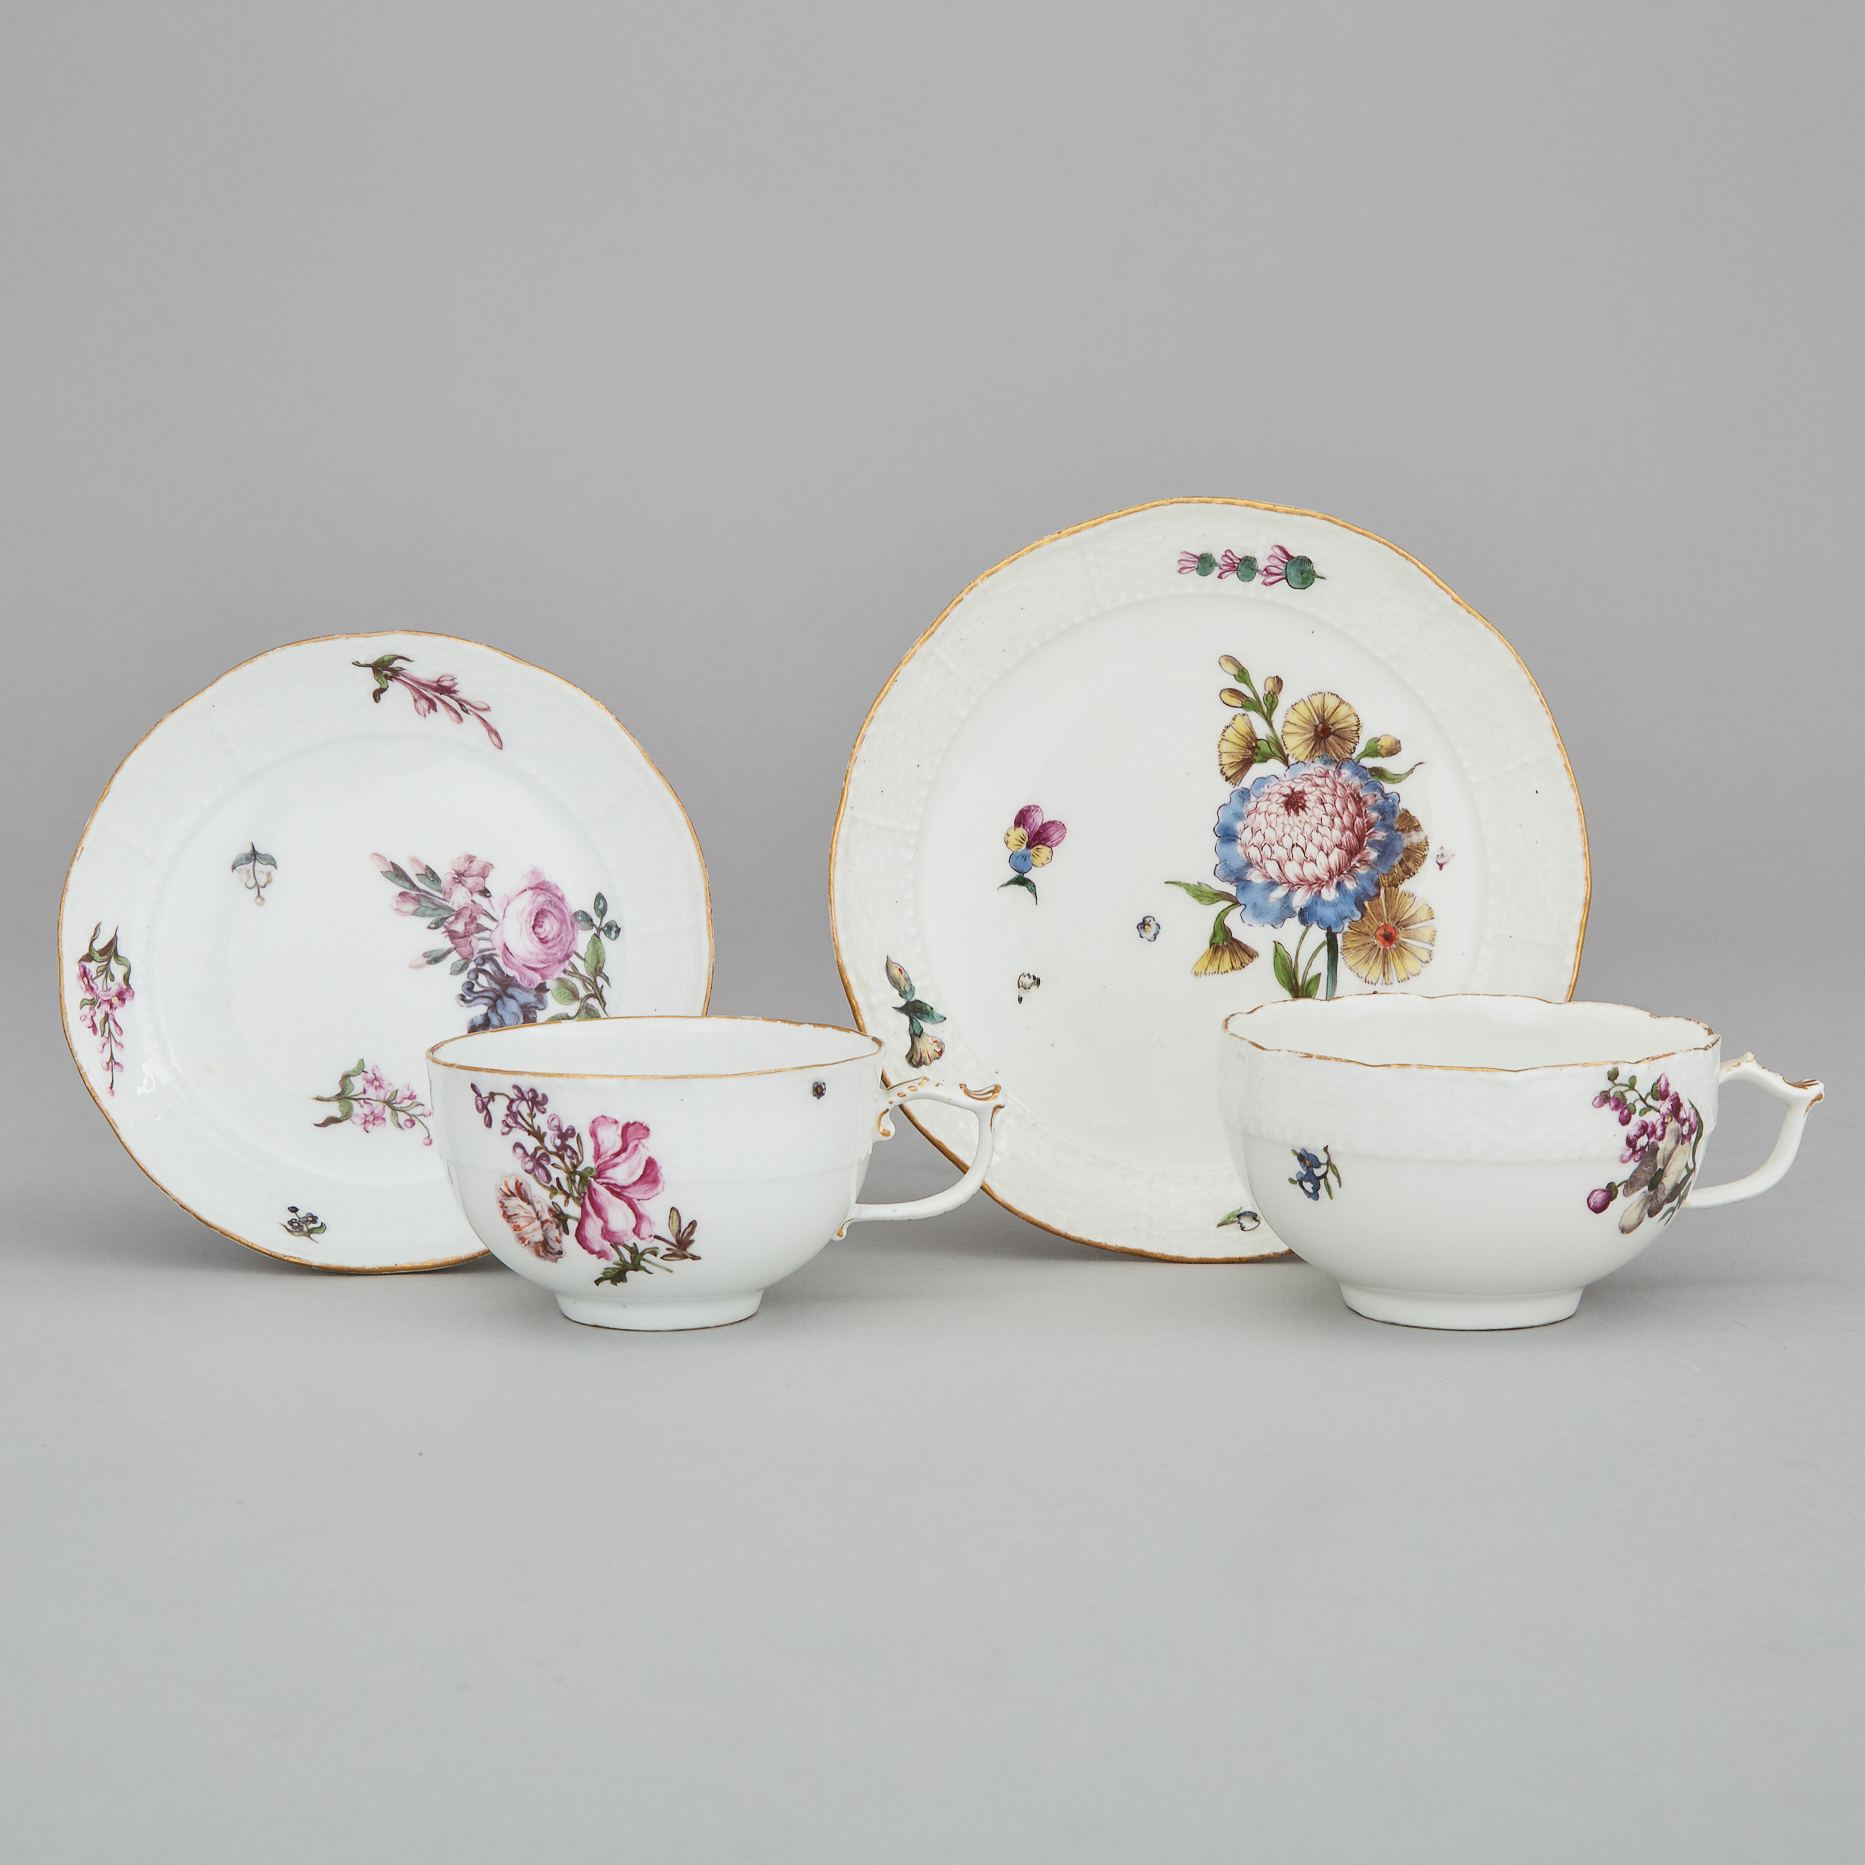 Two Meissen Cups and Saucers, late 18th century